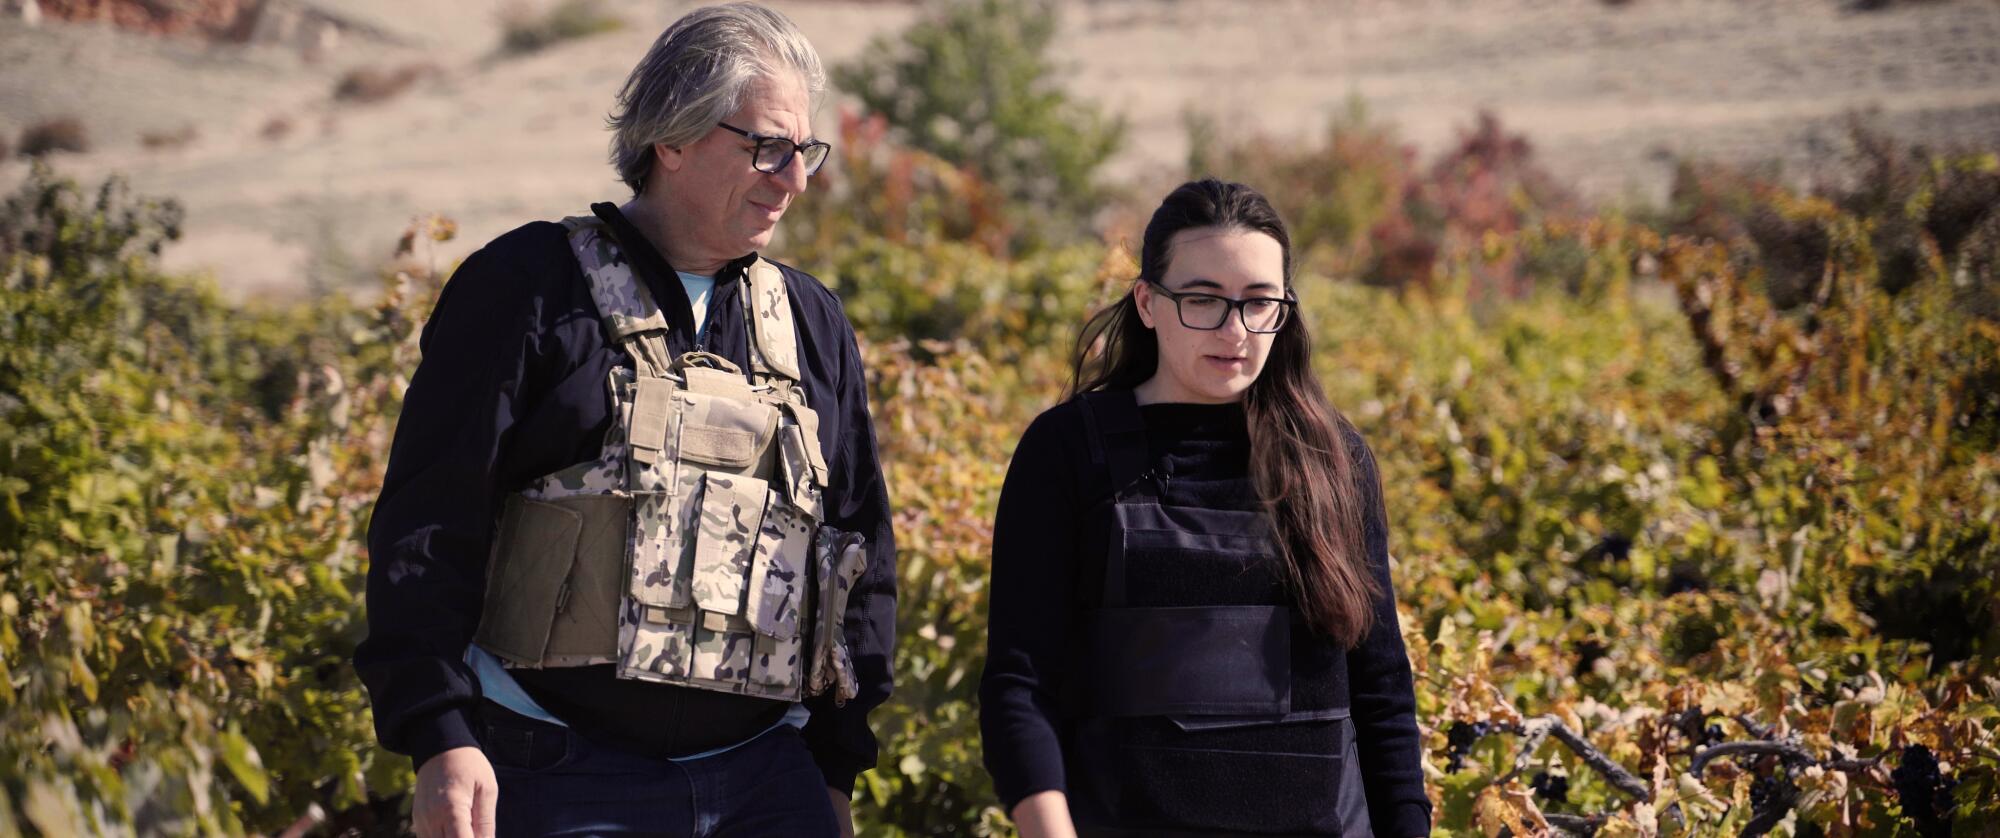 A father and daughter wearing bulletproof vests walk through their vineyard.